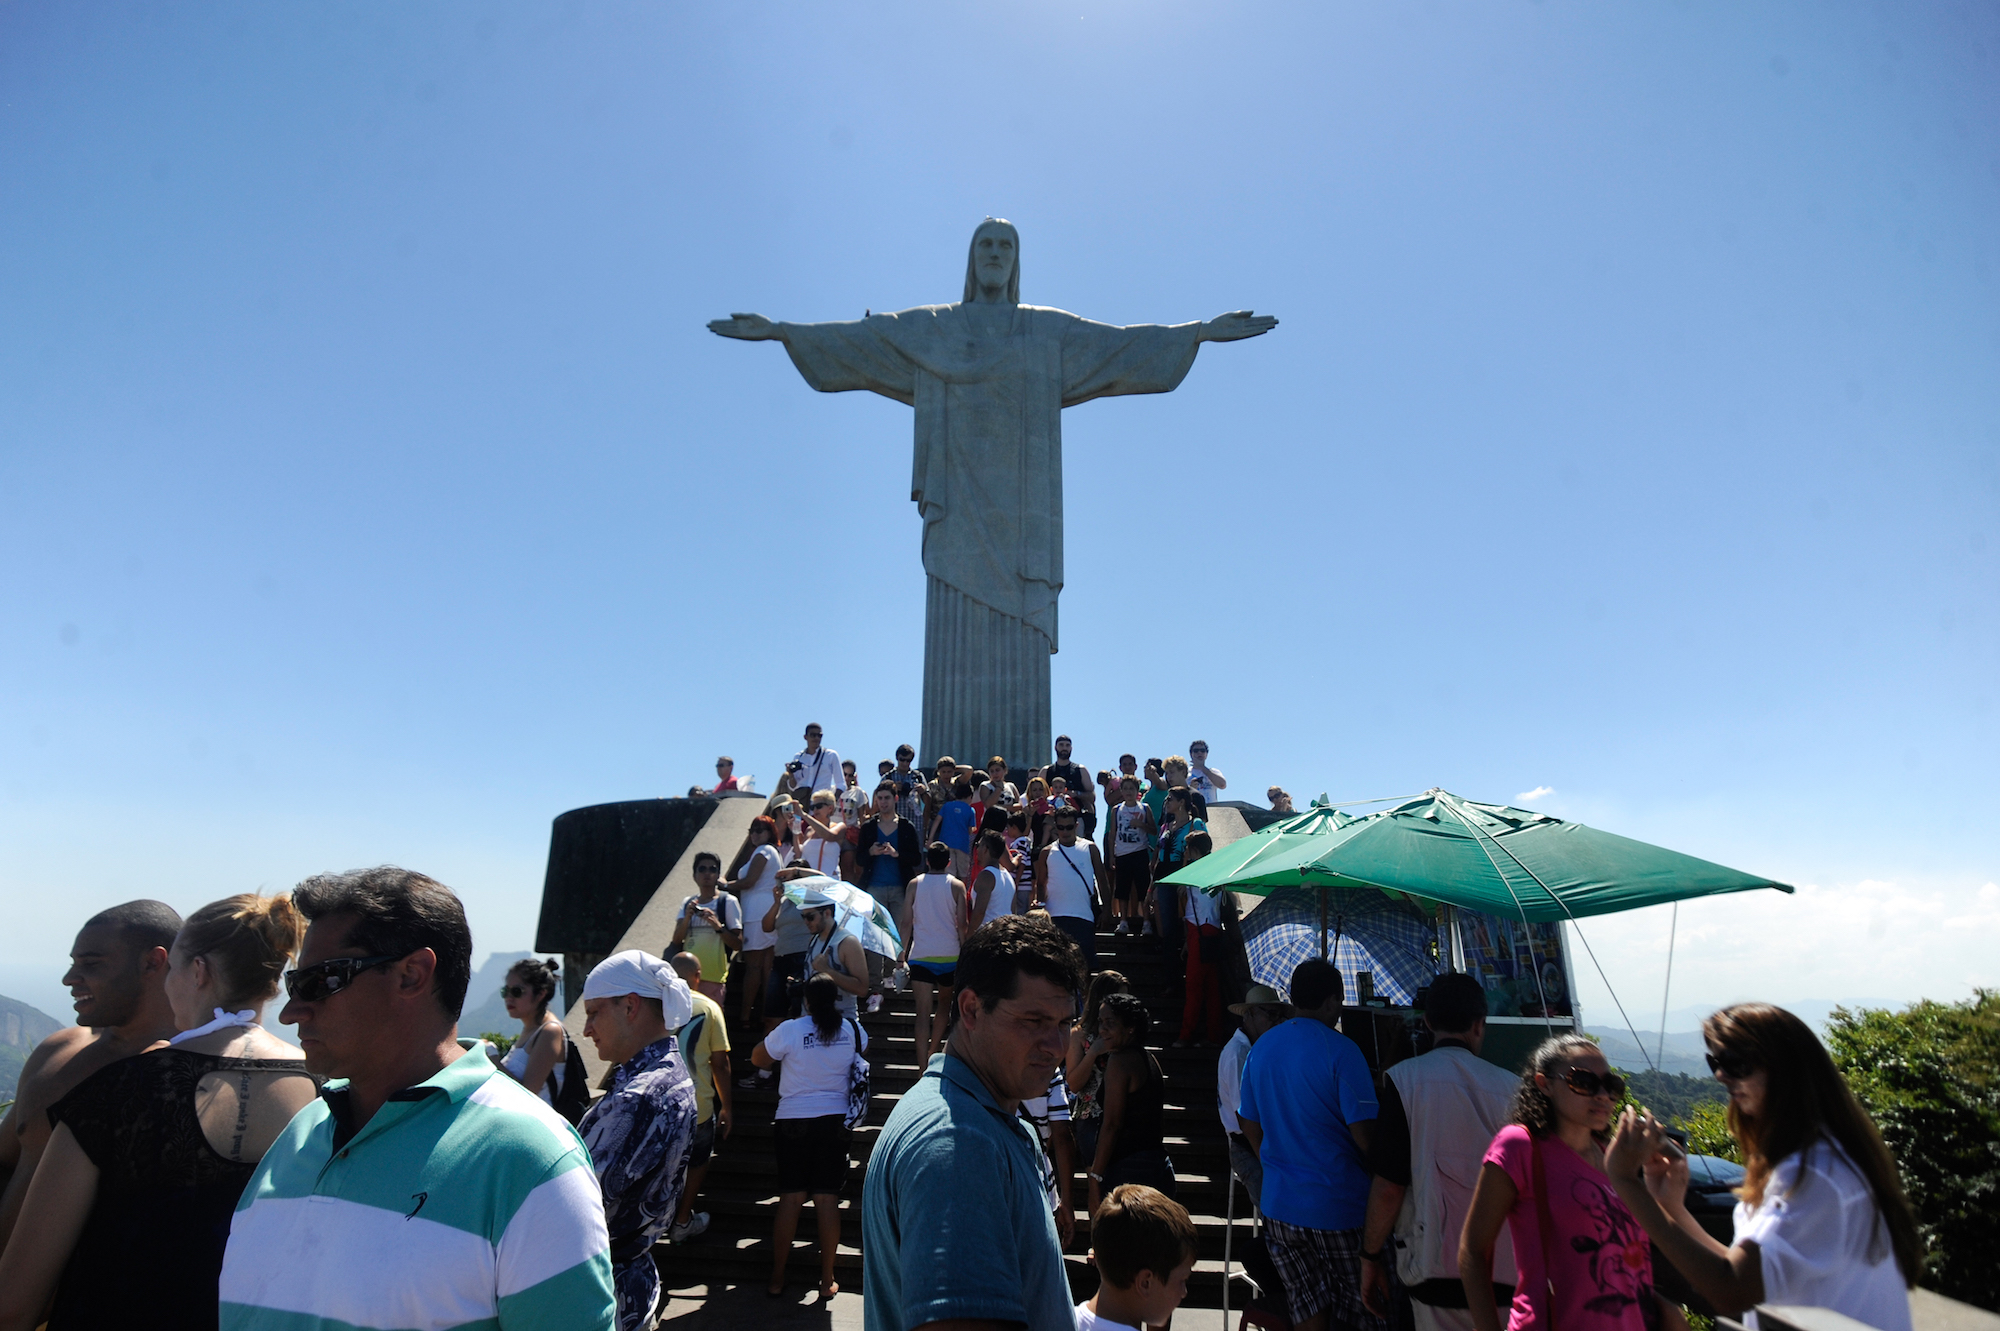 Brazilian tourism lost R$41.6 (US$7.6) billion between the months of March and September 2020, the period of the Covid-19 pandemic in the country.